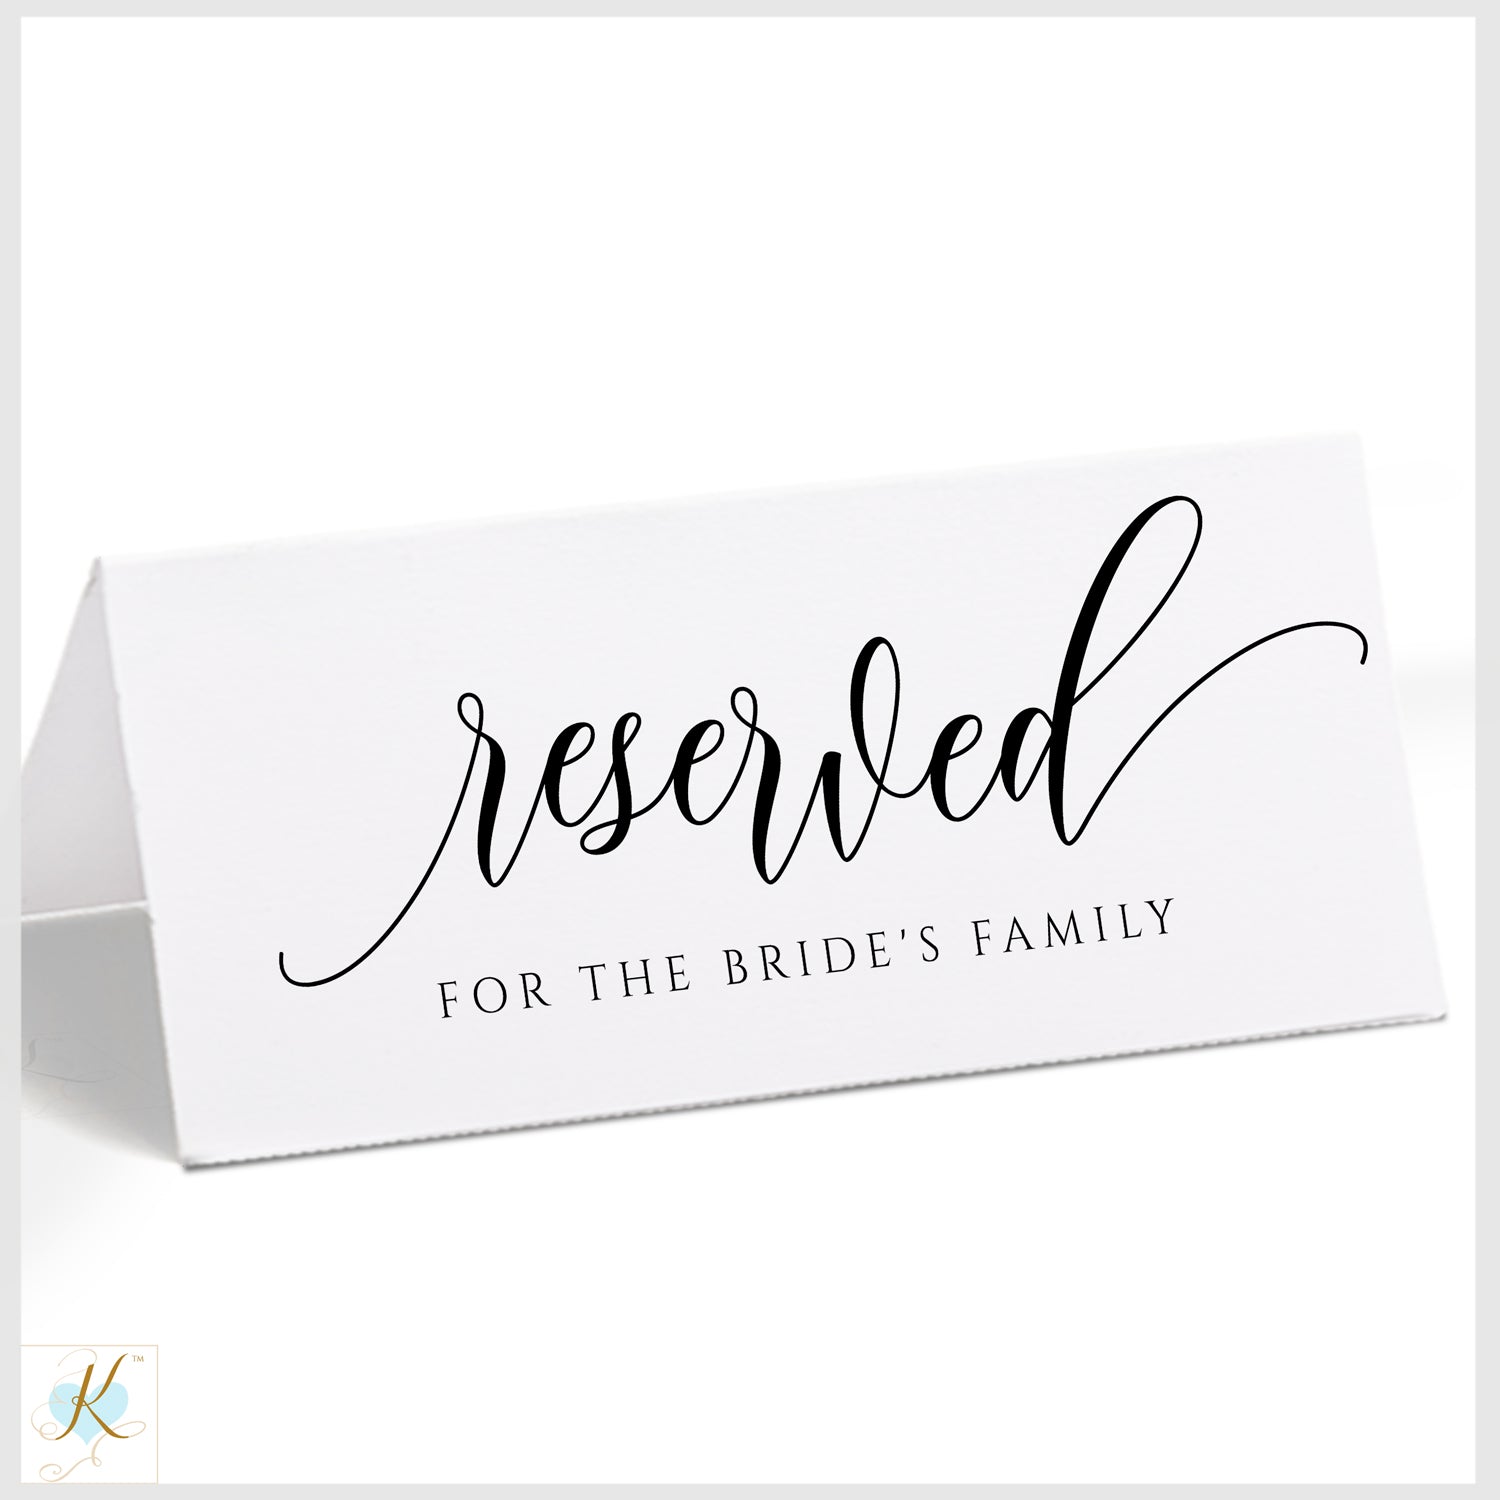 printable reserved sign